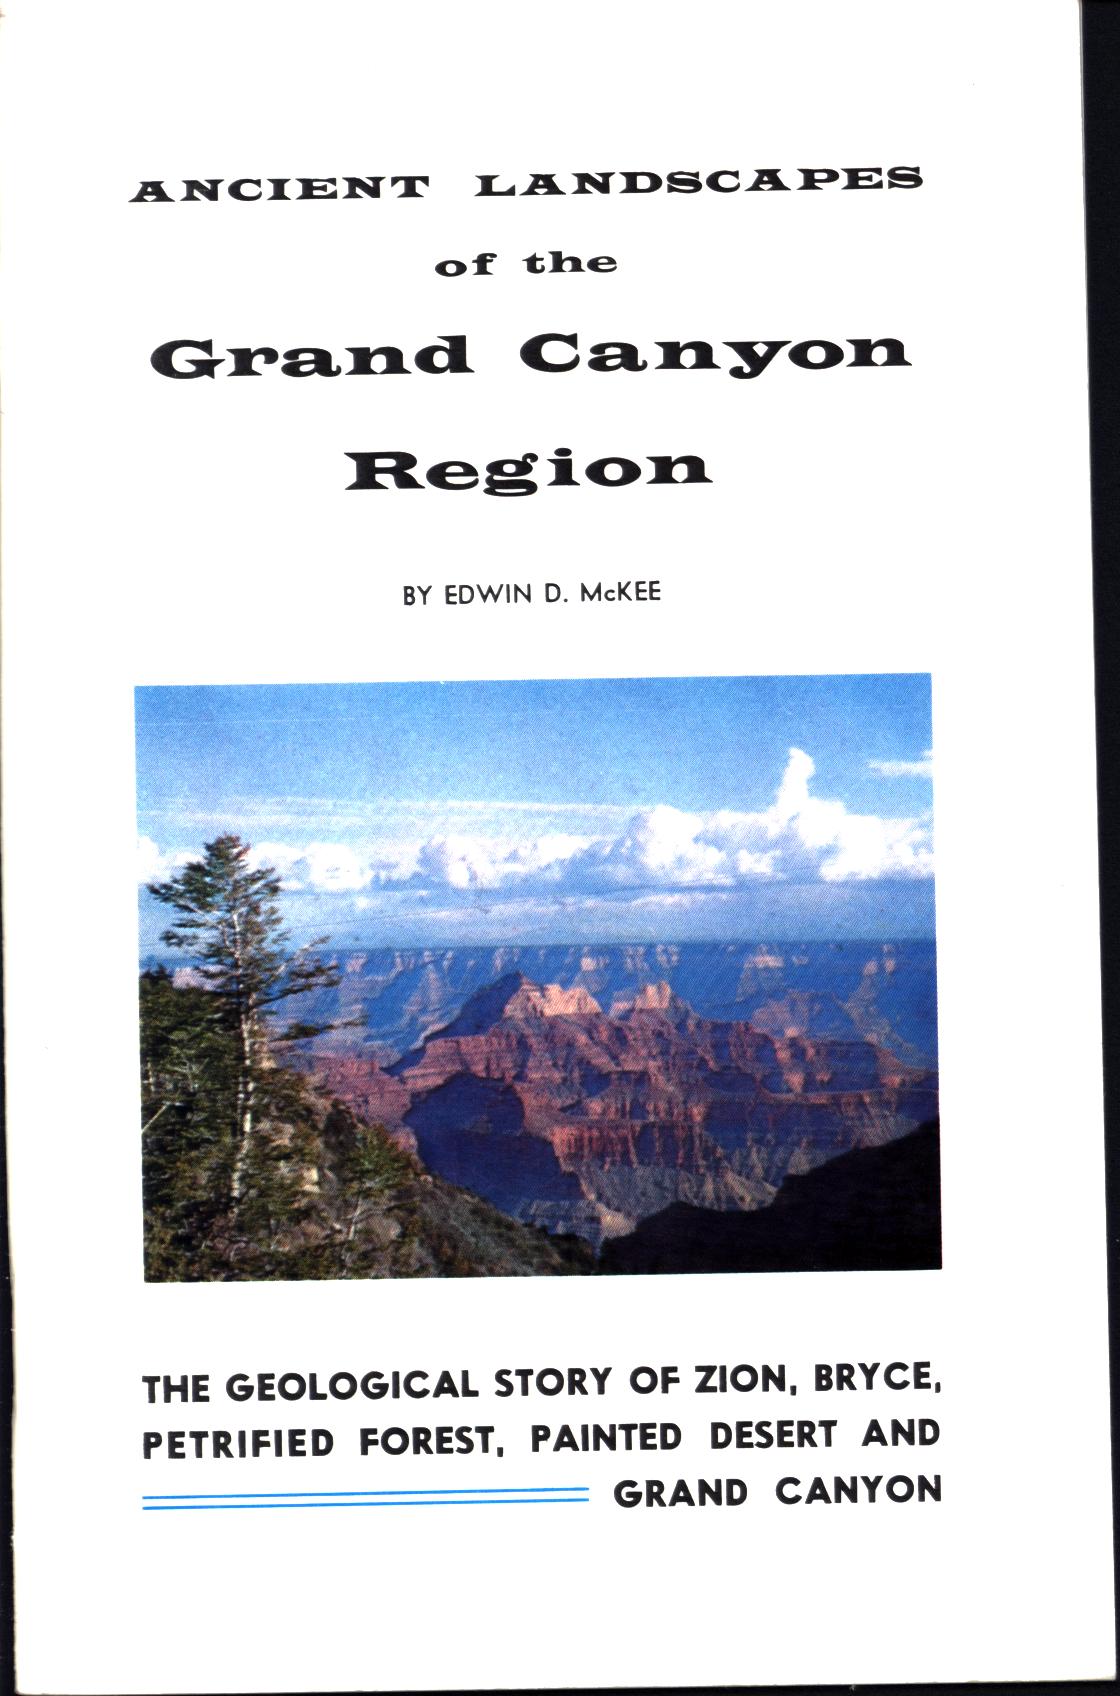 ANCIENT LANDSCAPES OF THE GRAND CANYON REGION.